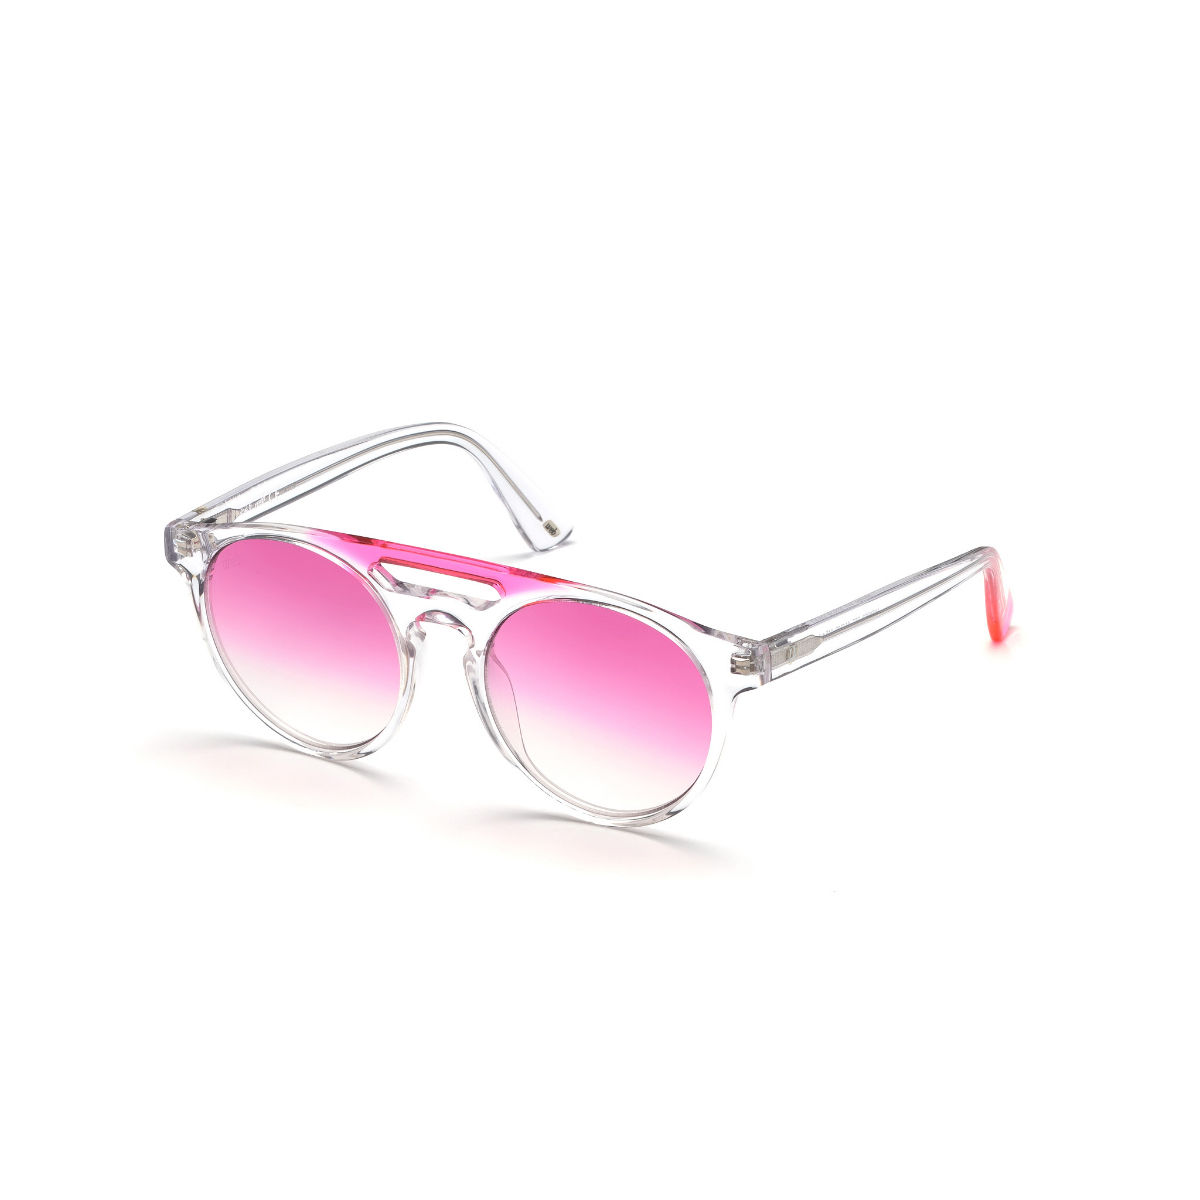 Pre-owned Sunglasses in pink ($85) ❤ liked on Polyvore featuring